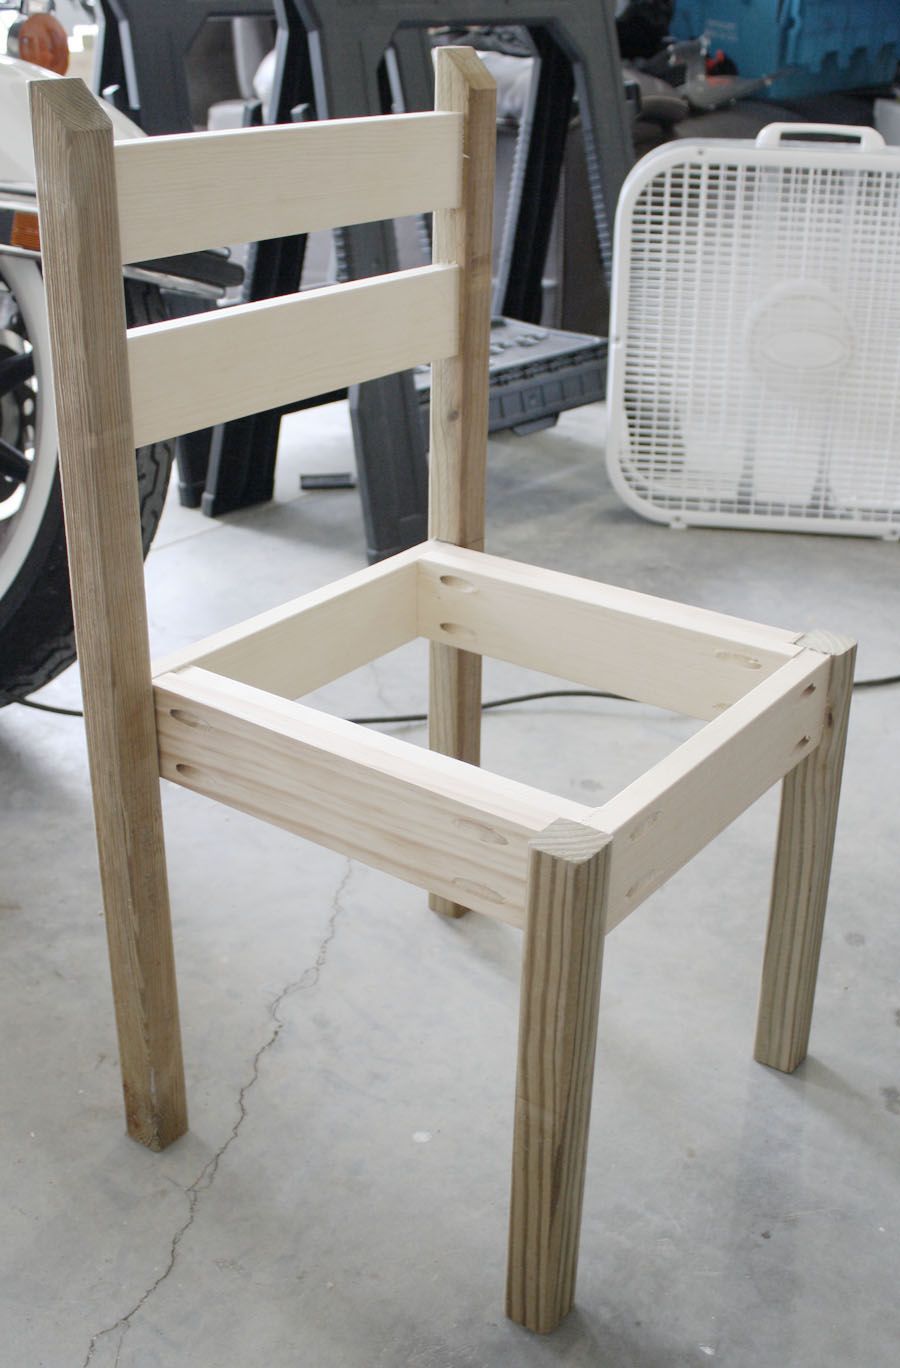 How To Build A DIY Kids Chair - How To Build A DIY Kids Chair -   19 diy Kids chair ideas